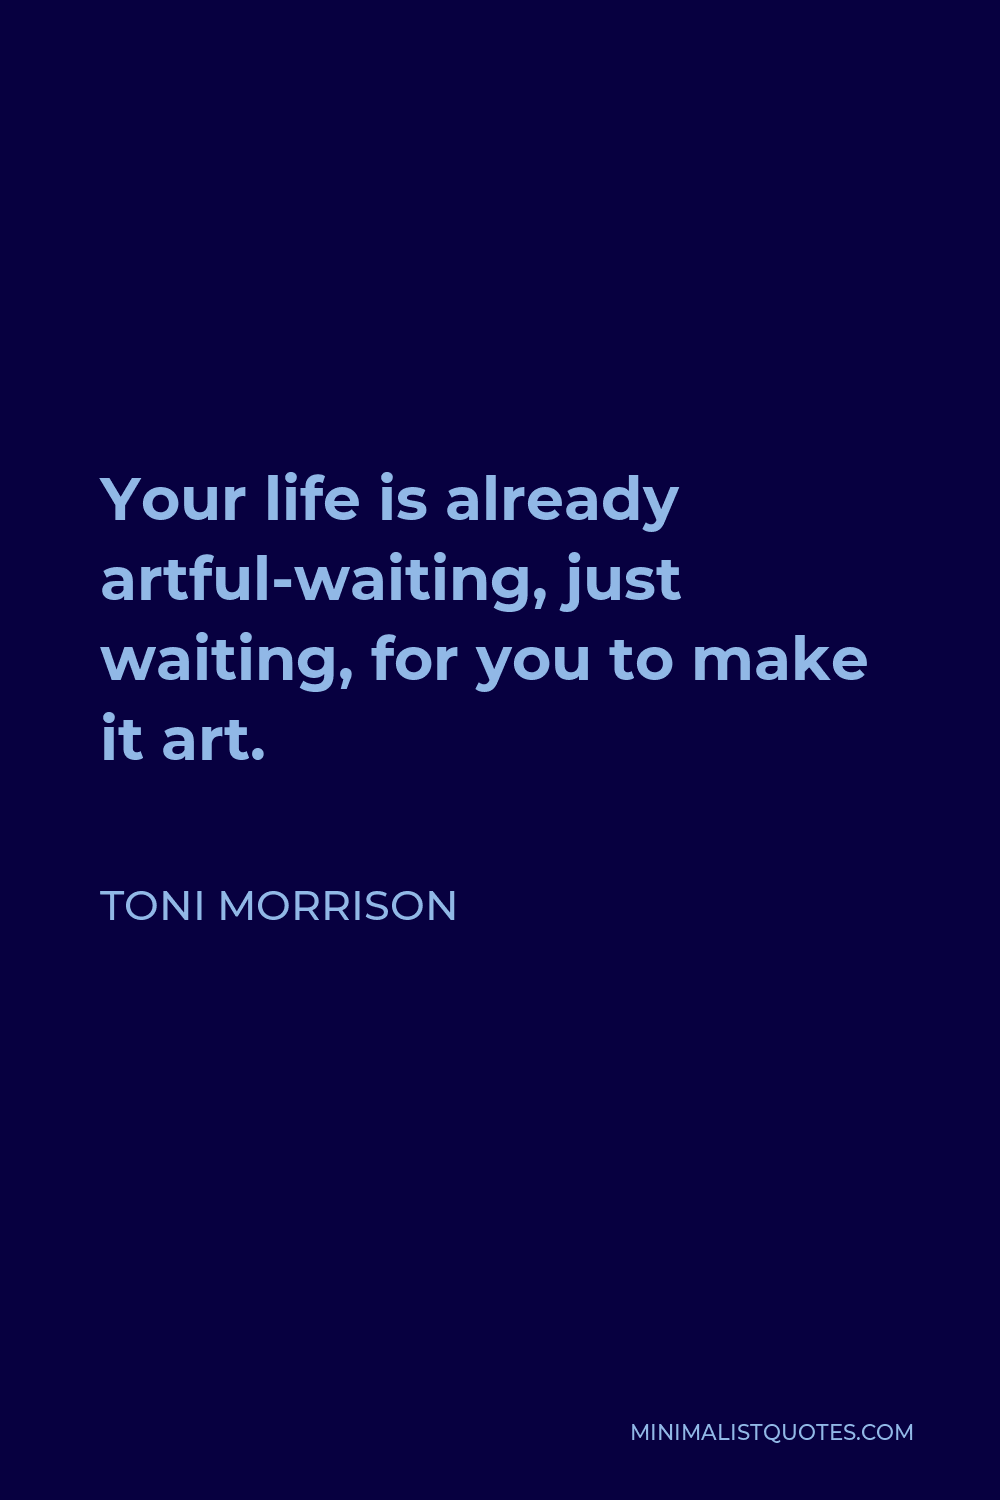 Toni Morrison Quote - Your life is already artful-waiting, just waiting, for you to make it art.